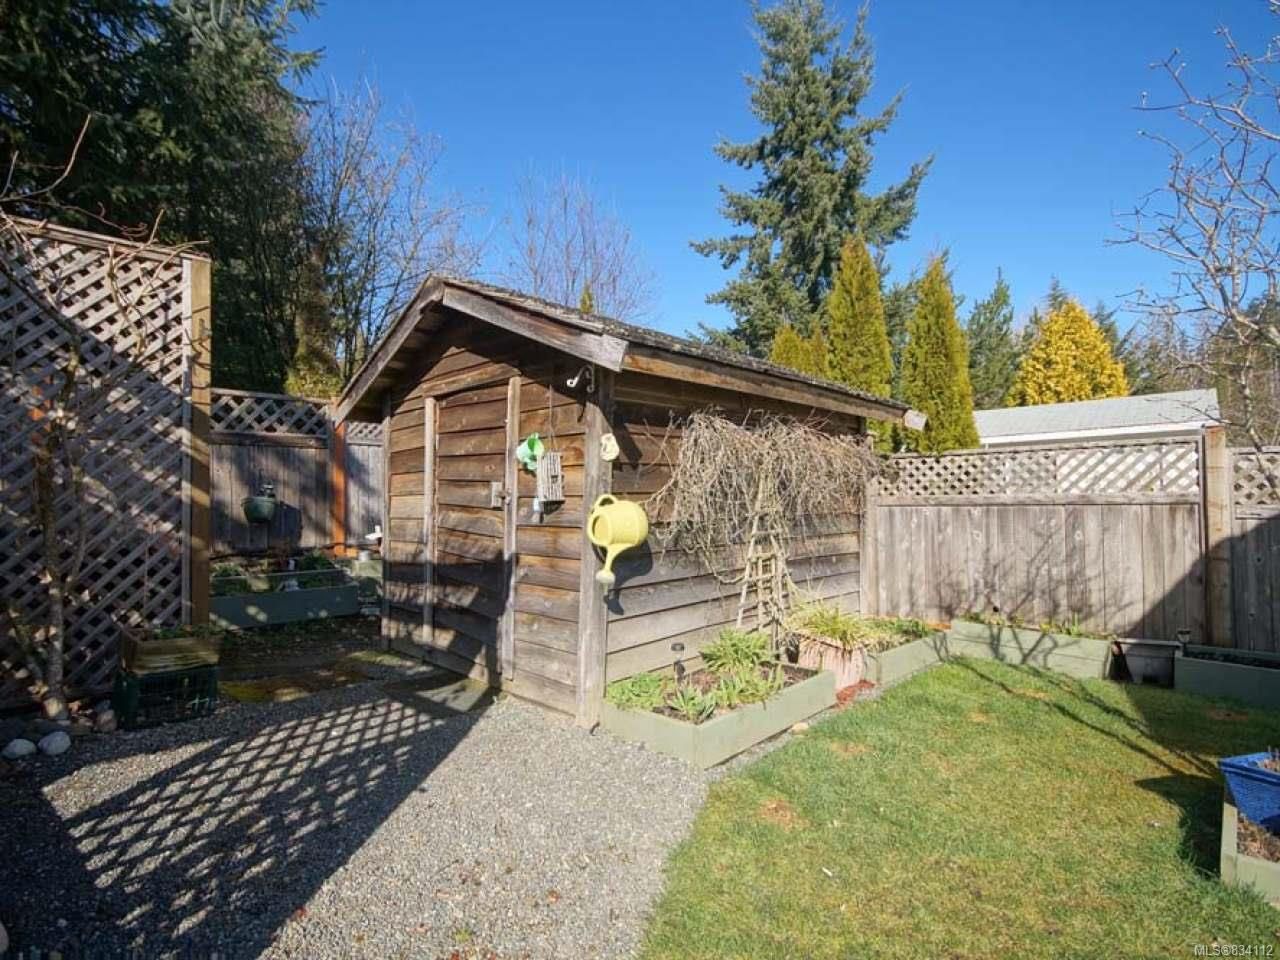 Photo 19: Photos: 110 1391 PRICE ROAD in PARKSVILLE: PQ Errington/Coombs/Hilliers Manufactured Home for sale (Parksville/Qualicum)  : MLS®# 834112